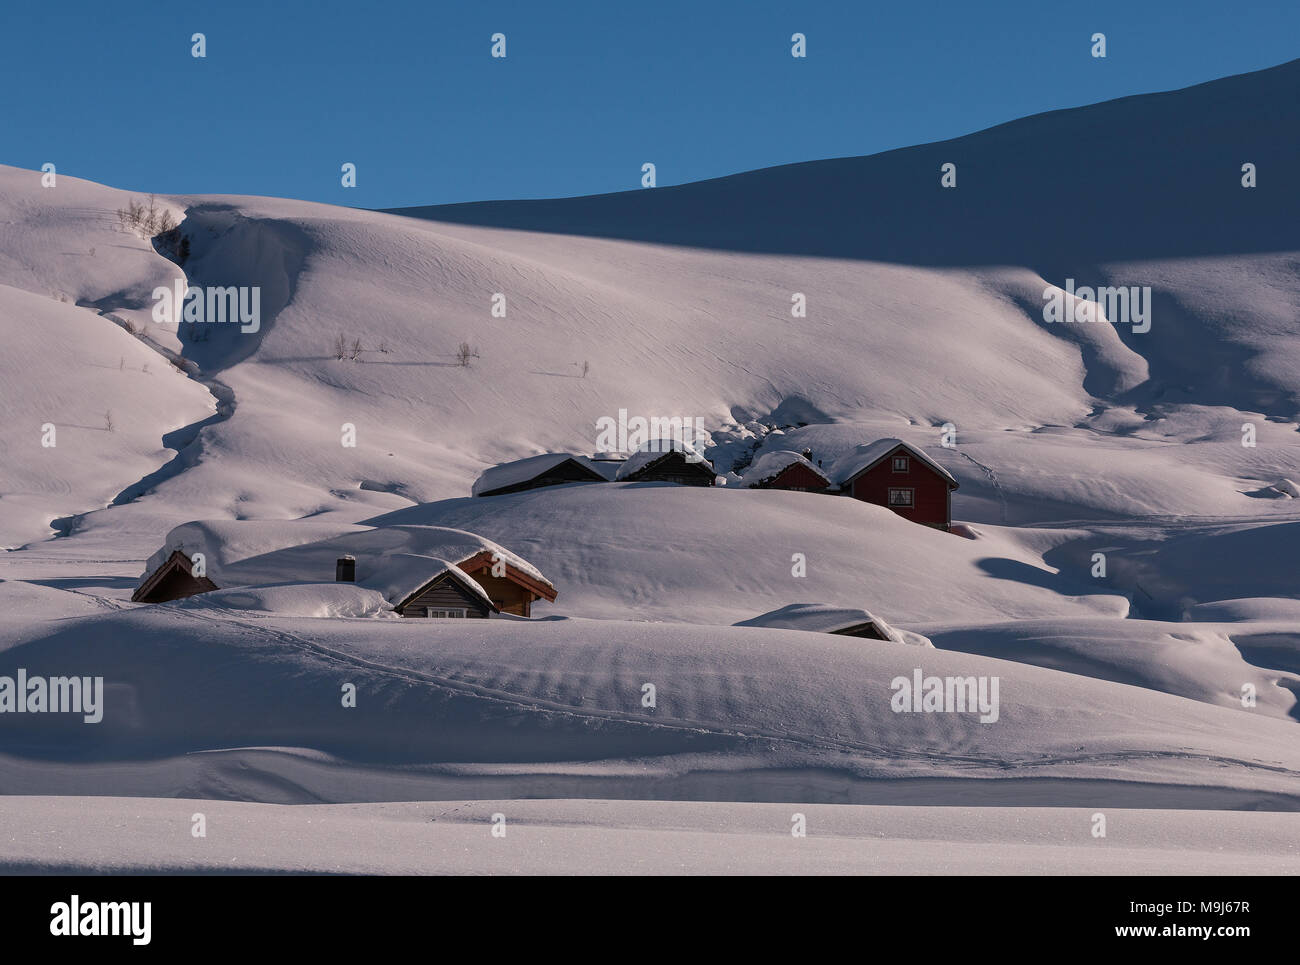 Pristine mountain winterscape with snowdrifts and buried chalets showing mountain pastures at wintertime Stock Photo